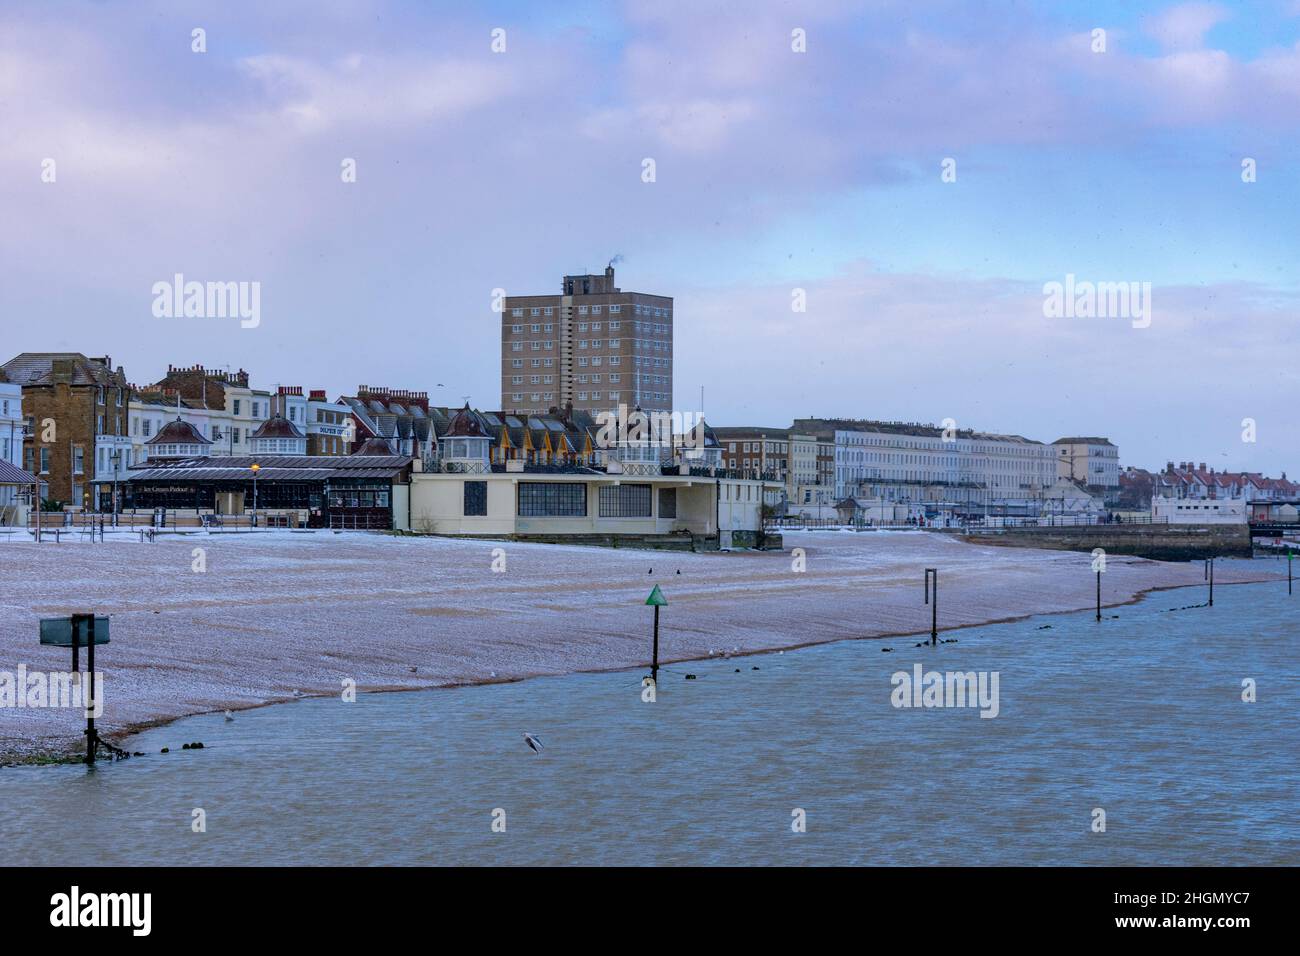 Herne Bay - The view from Neptune's Arm, looking towards the Bandstand and the beach with a sugar coating of snow on it in February 2021. Stock Photo